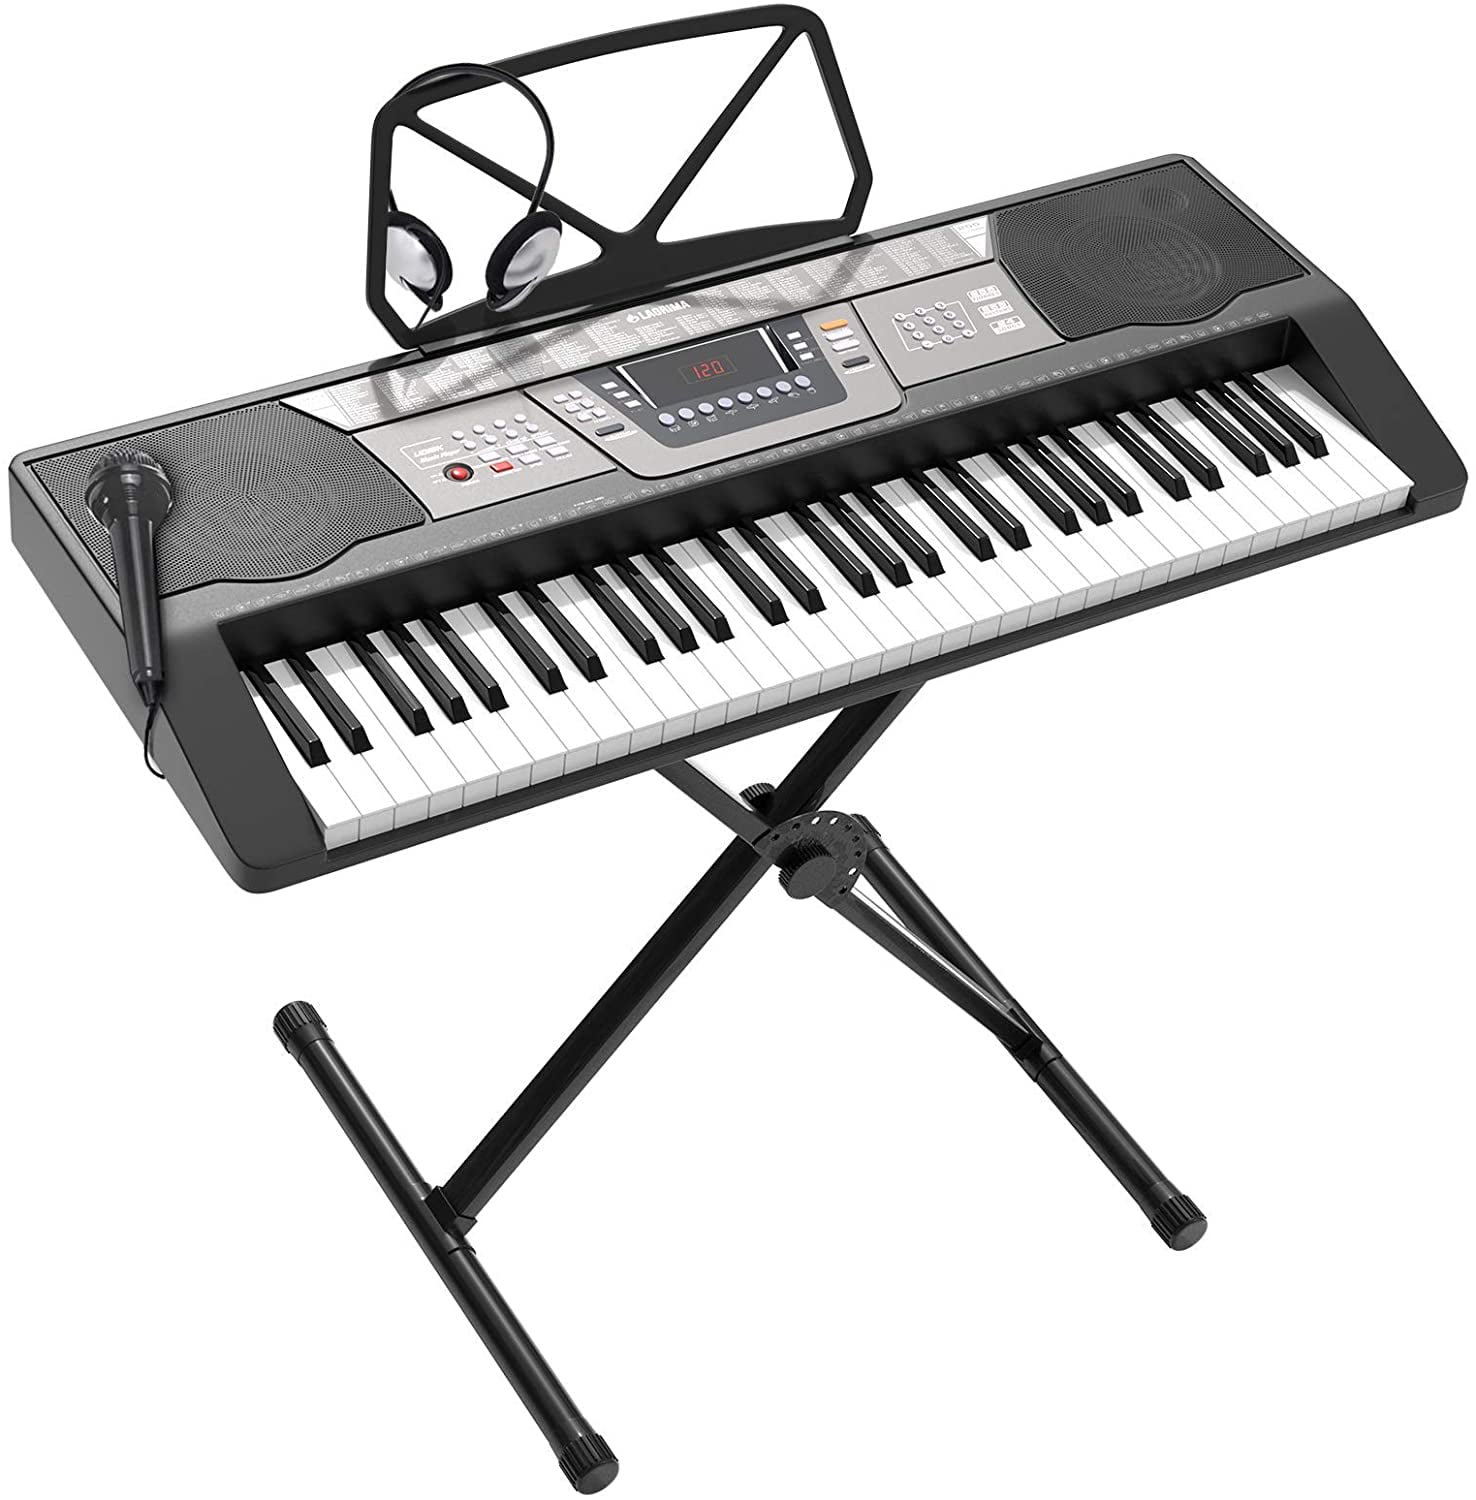 Black Digital Display Kid LAGRIMA LAG-350 61 Key Portable Electric Keyboard Piano w/Built In Speakers Recording Headphone Microphone Power Supply X Stand for Beginner Adult Music Stand 